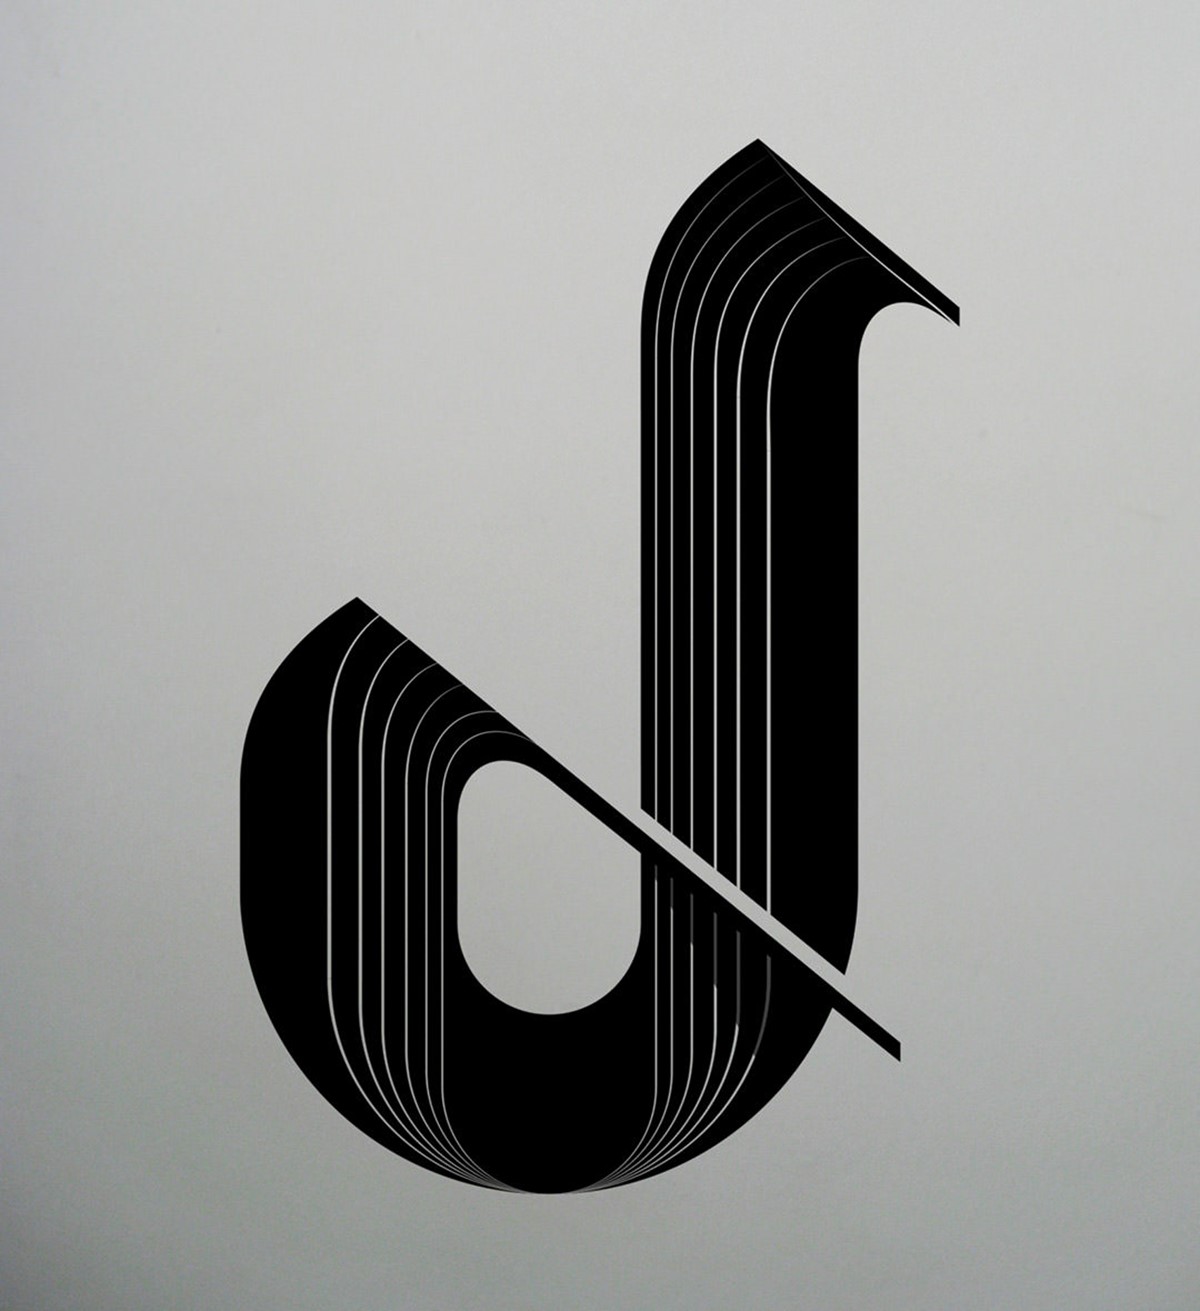 AIGA. Type Tuesday. BLT LTR Series. Typographic experiment: letter J. Design by Superfried.